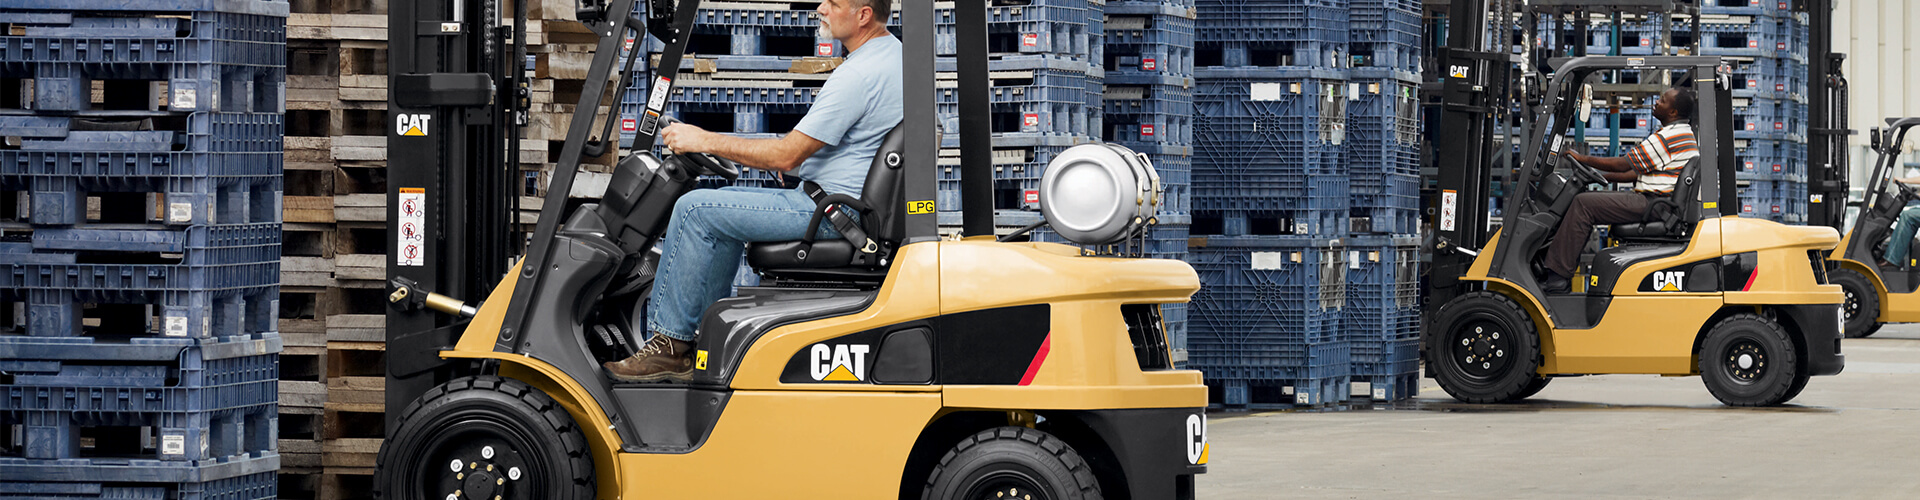 Cat Forklift drivers packing plastic pallets of products in a warehouse